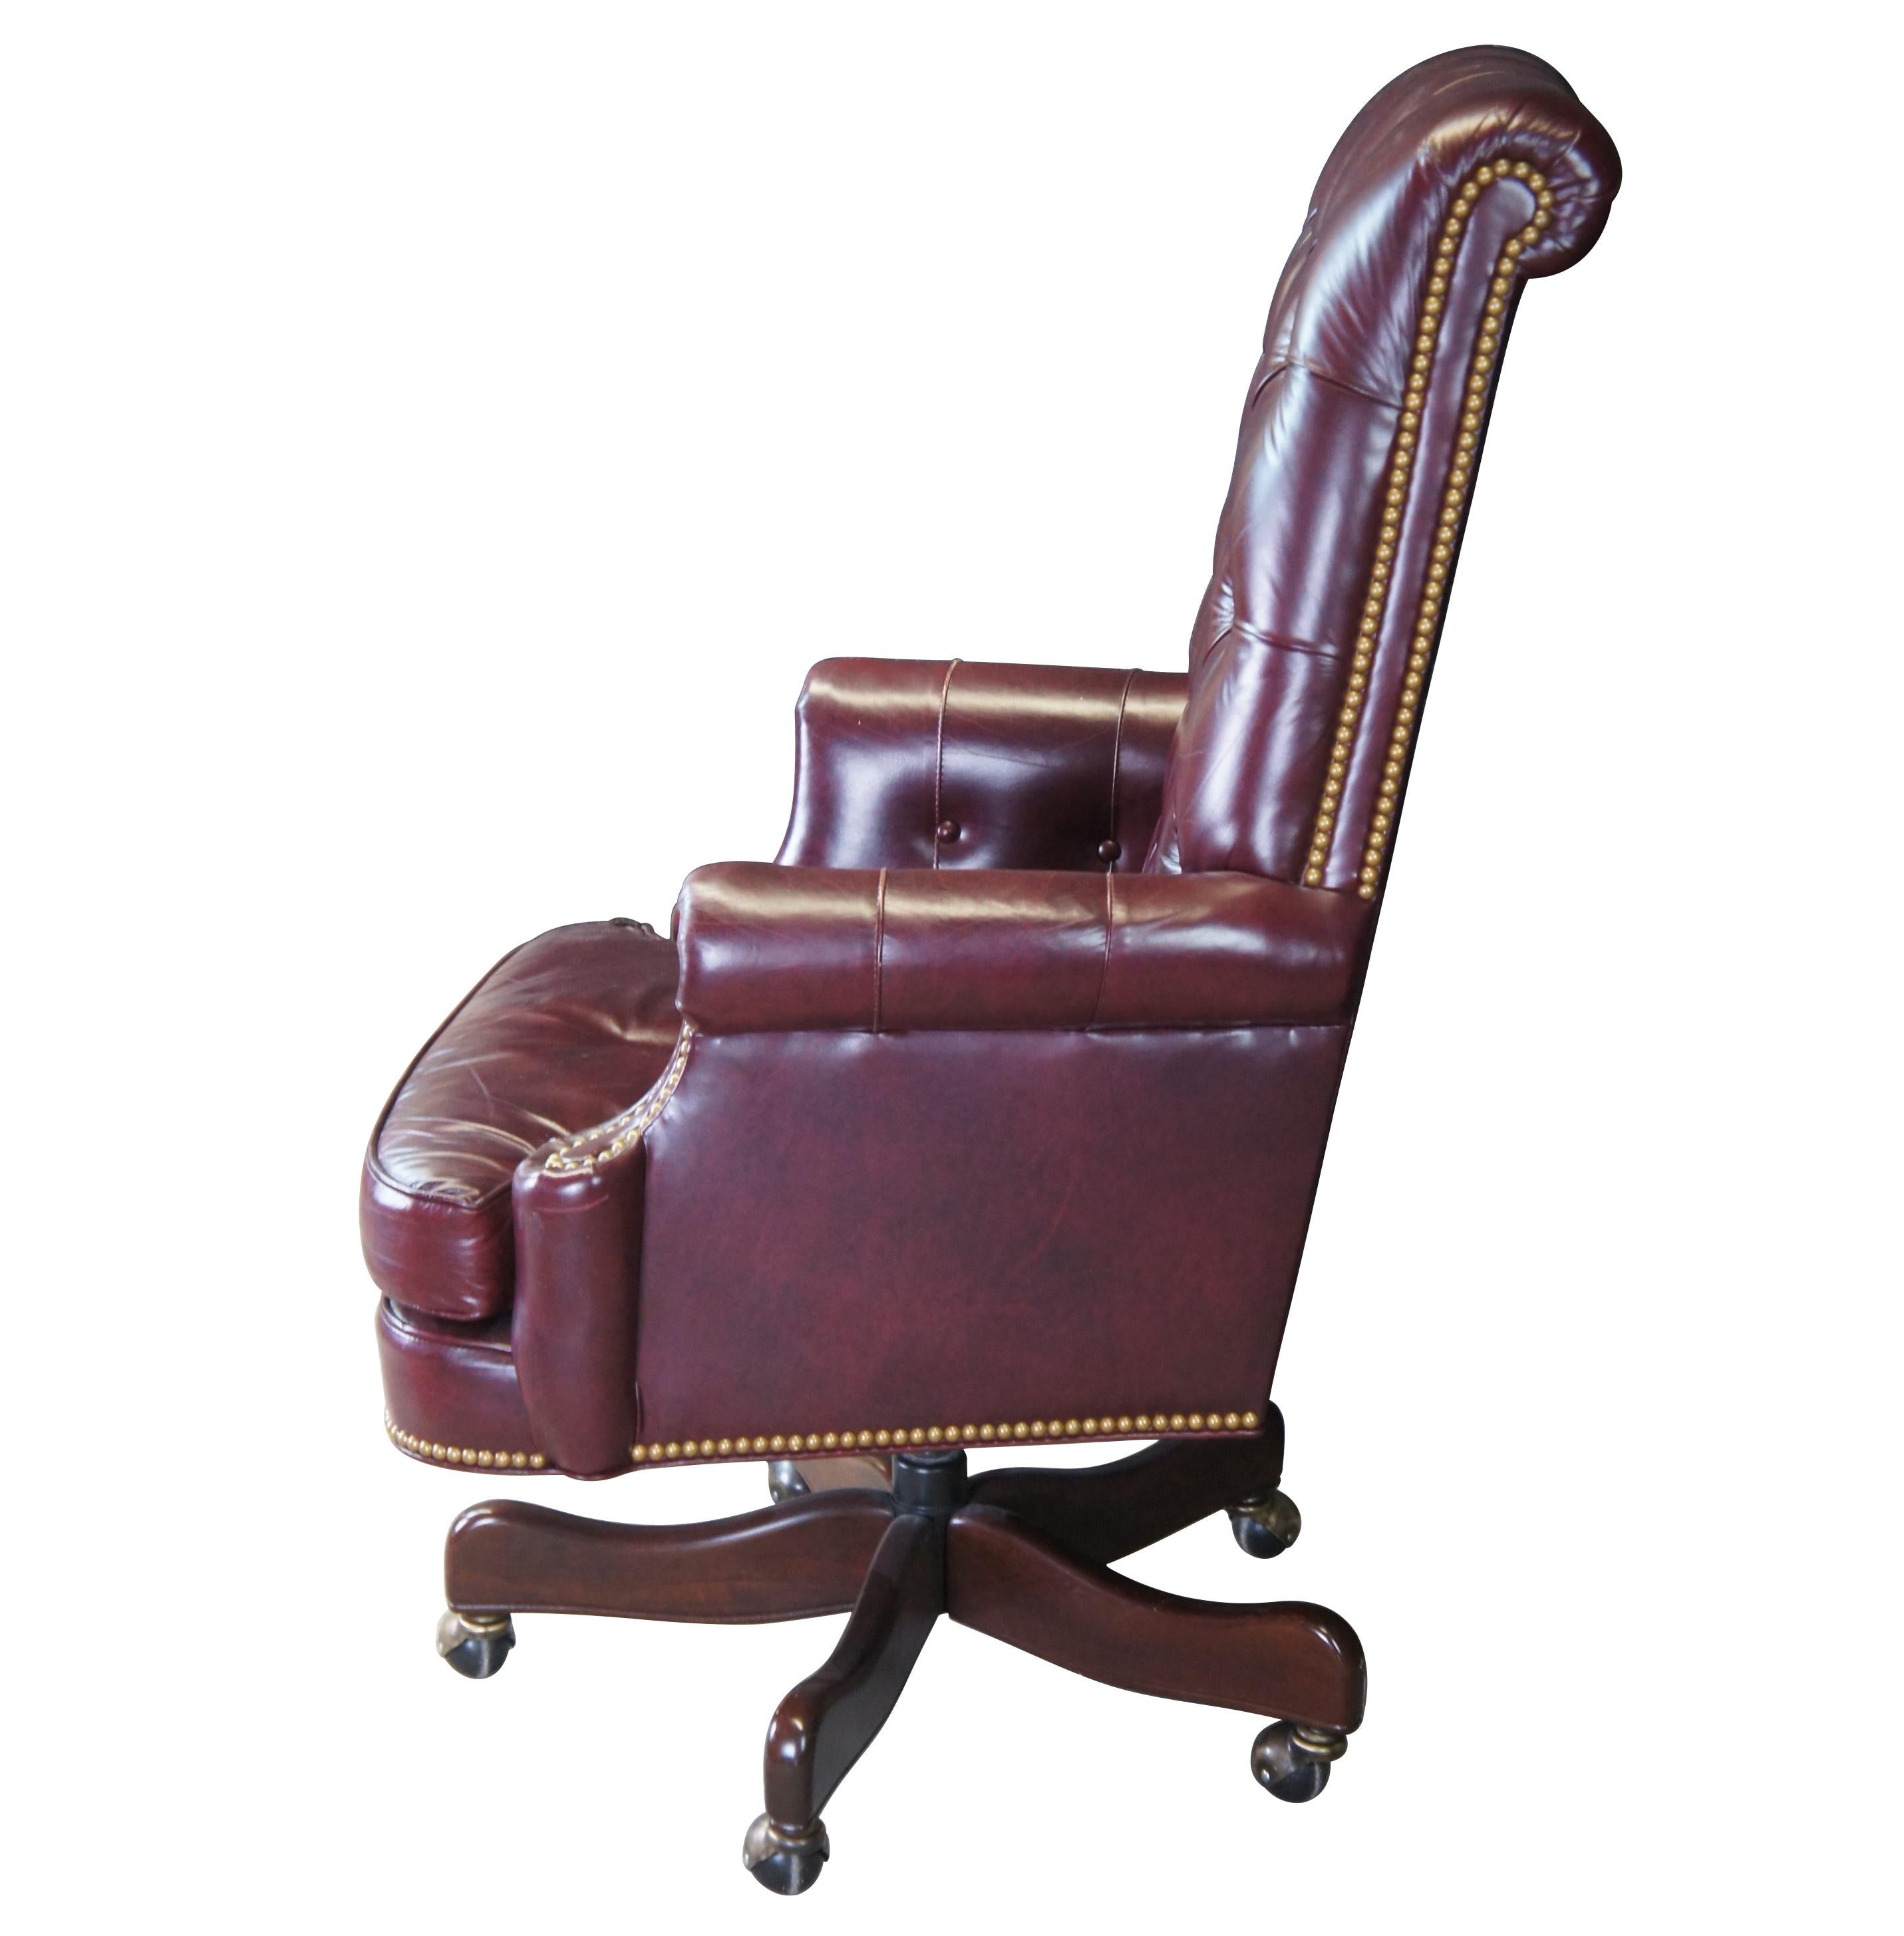 An exceptional leather executive office desk chair by Hancock & Moore.  Features a red leather tufted frame with scrolled arms and back.  Includes brass nail head trim and removable cushion.  The chair supported by a 5 leg mahogany finished base